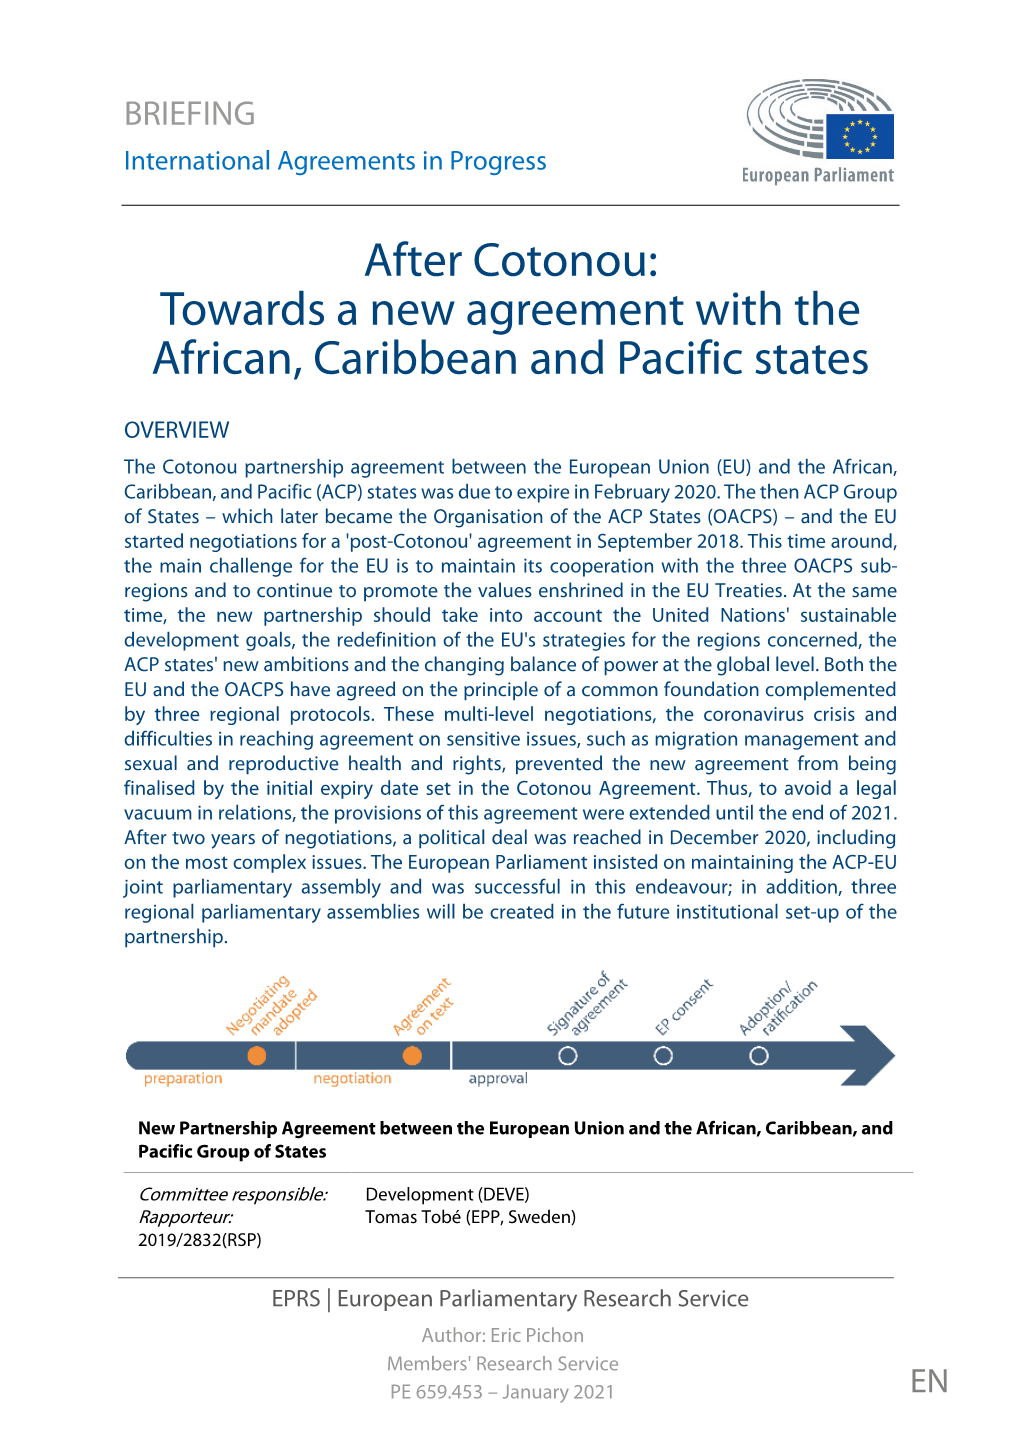 Towards a New Agreement with the African, Caribbean and Pacific States